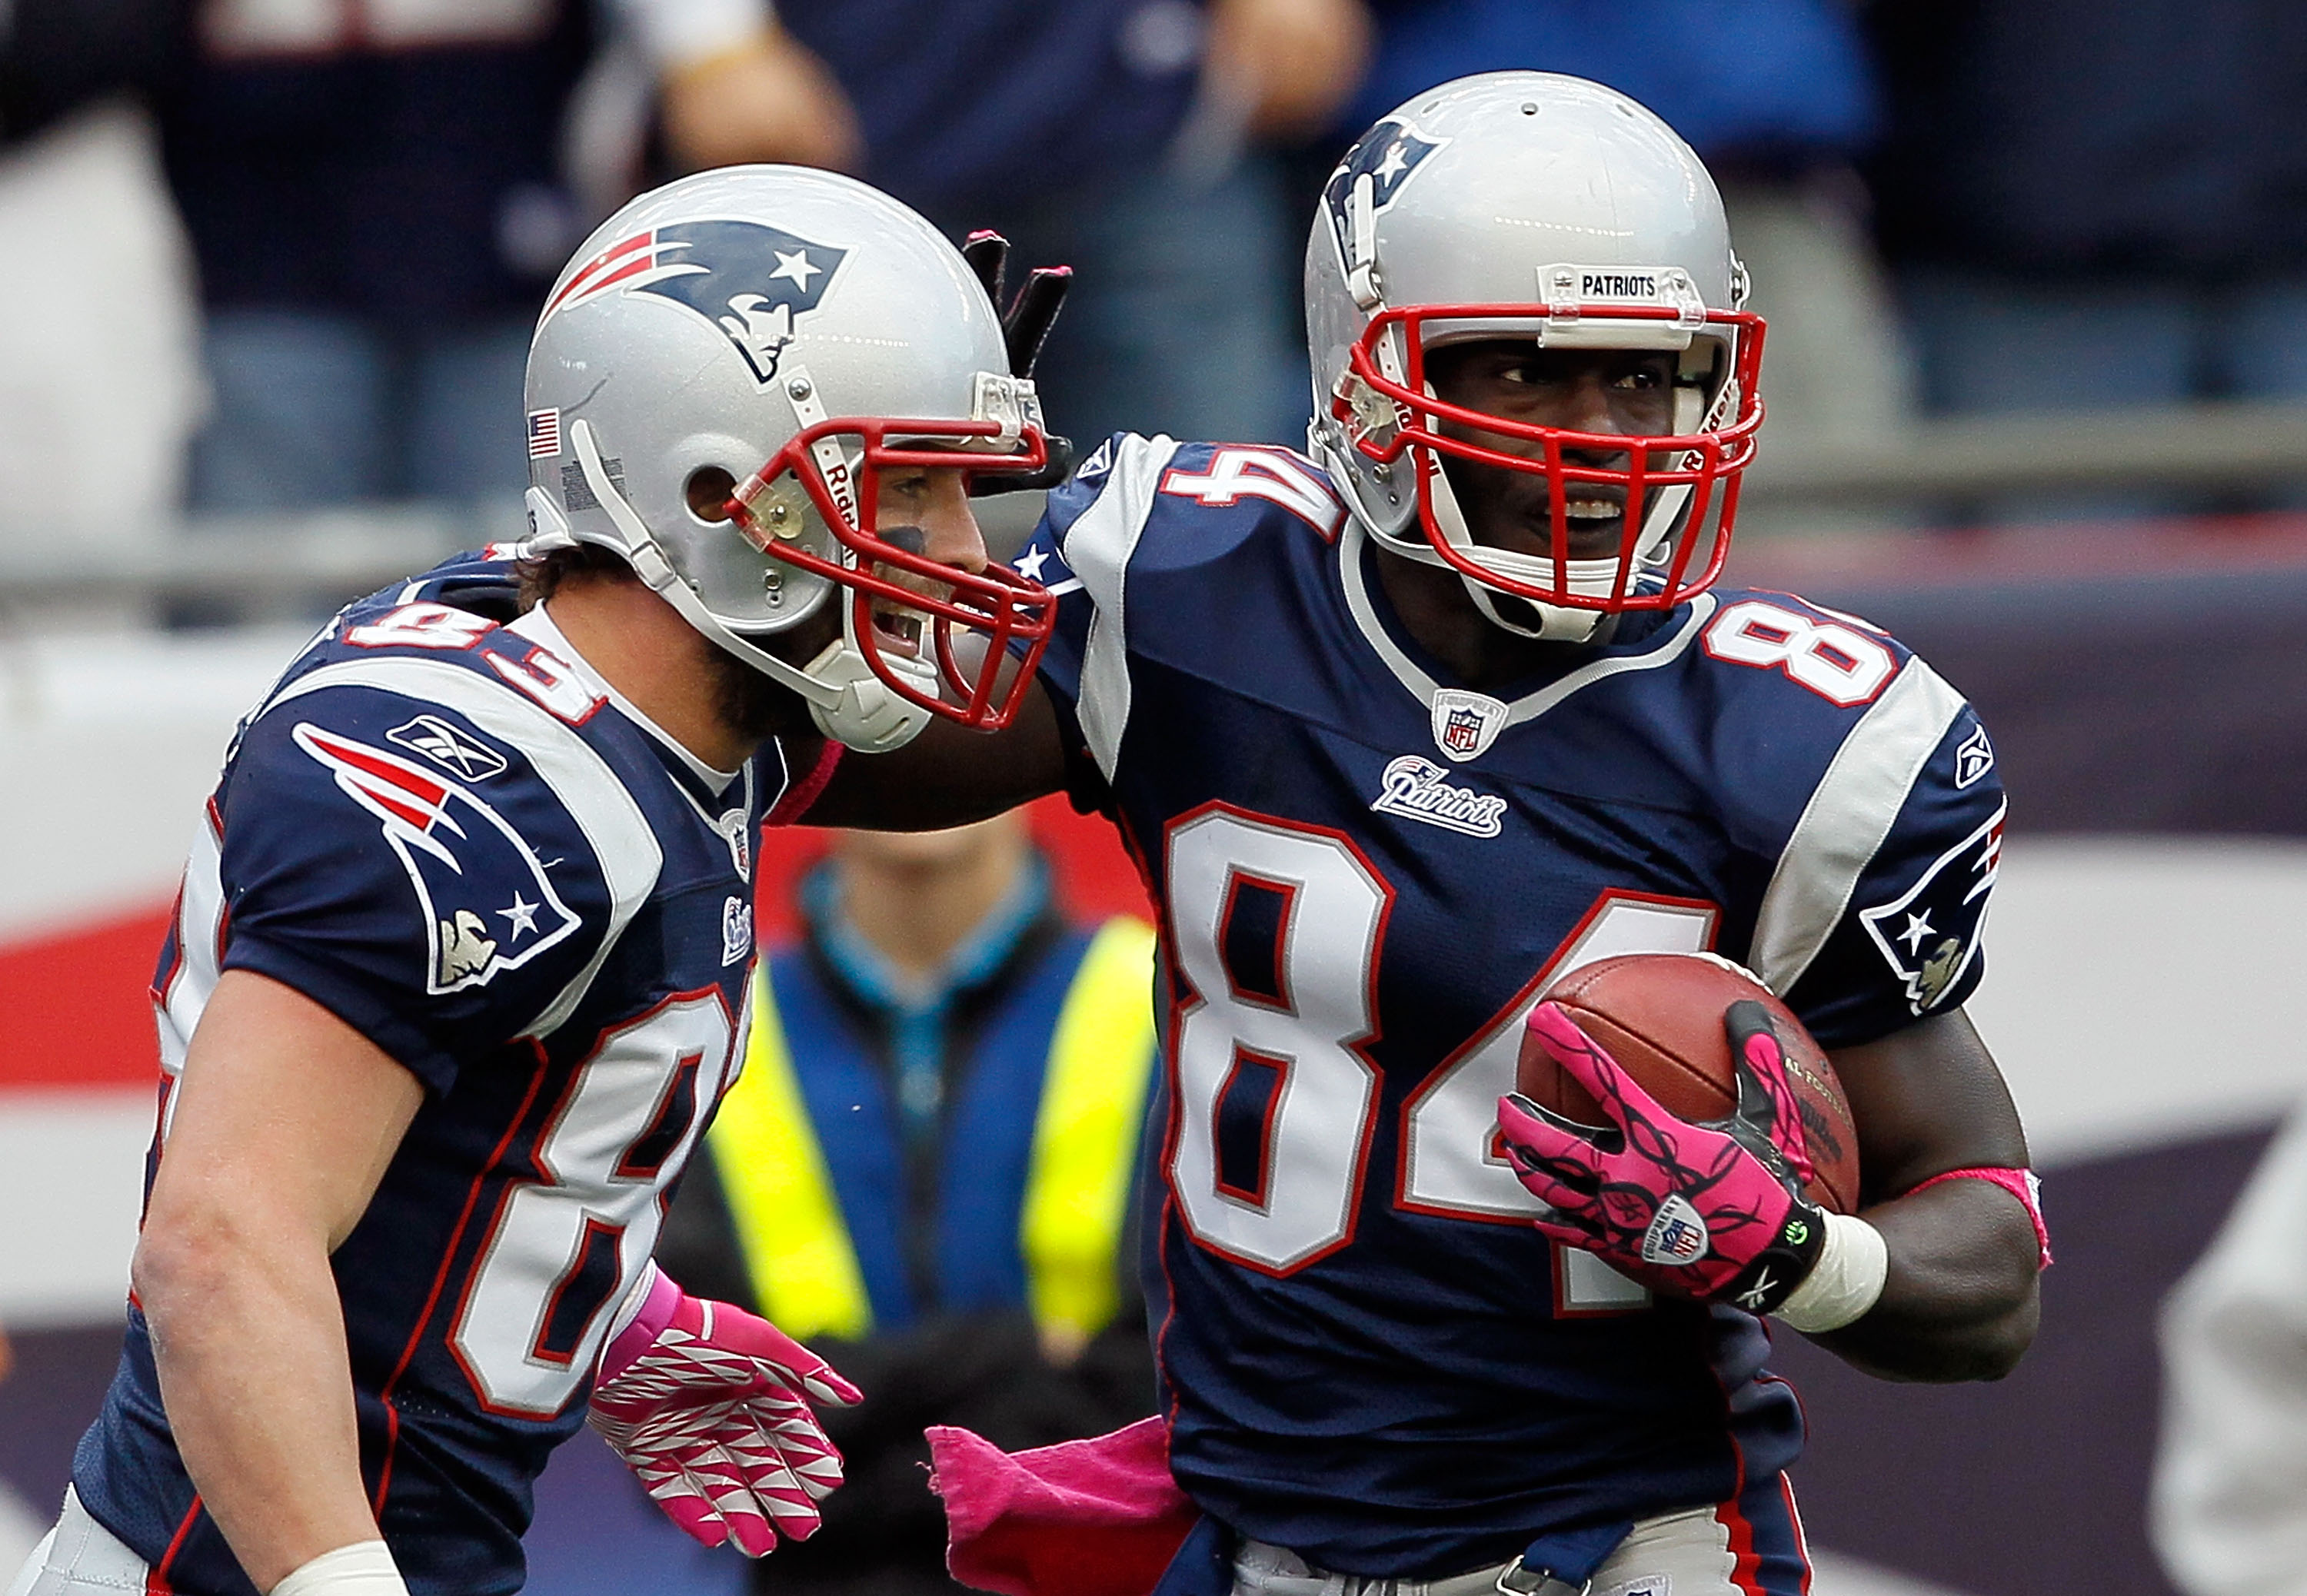 FOXBORO, MA - OCTOBER 17:  Wes Welker #83 celebrate with teammate Deion Branch #84, both of the New England Patriots, after Branch caught a touchdown pass in the second half against the Baltimore Ravens at Gillette Stadium on October 17, 2010 in Foxboro,